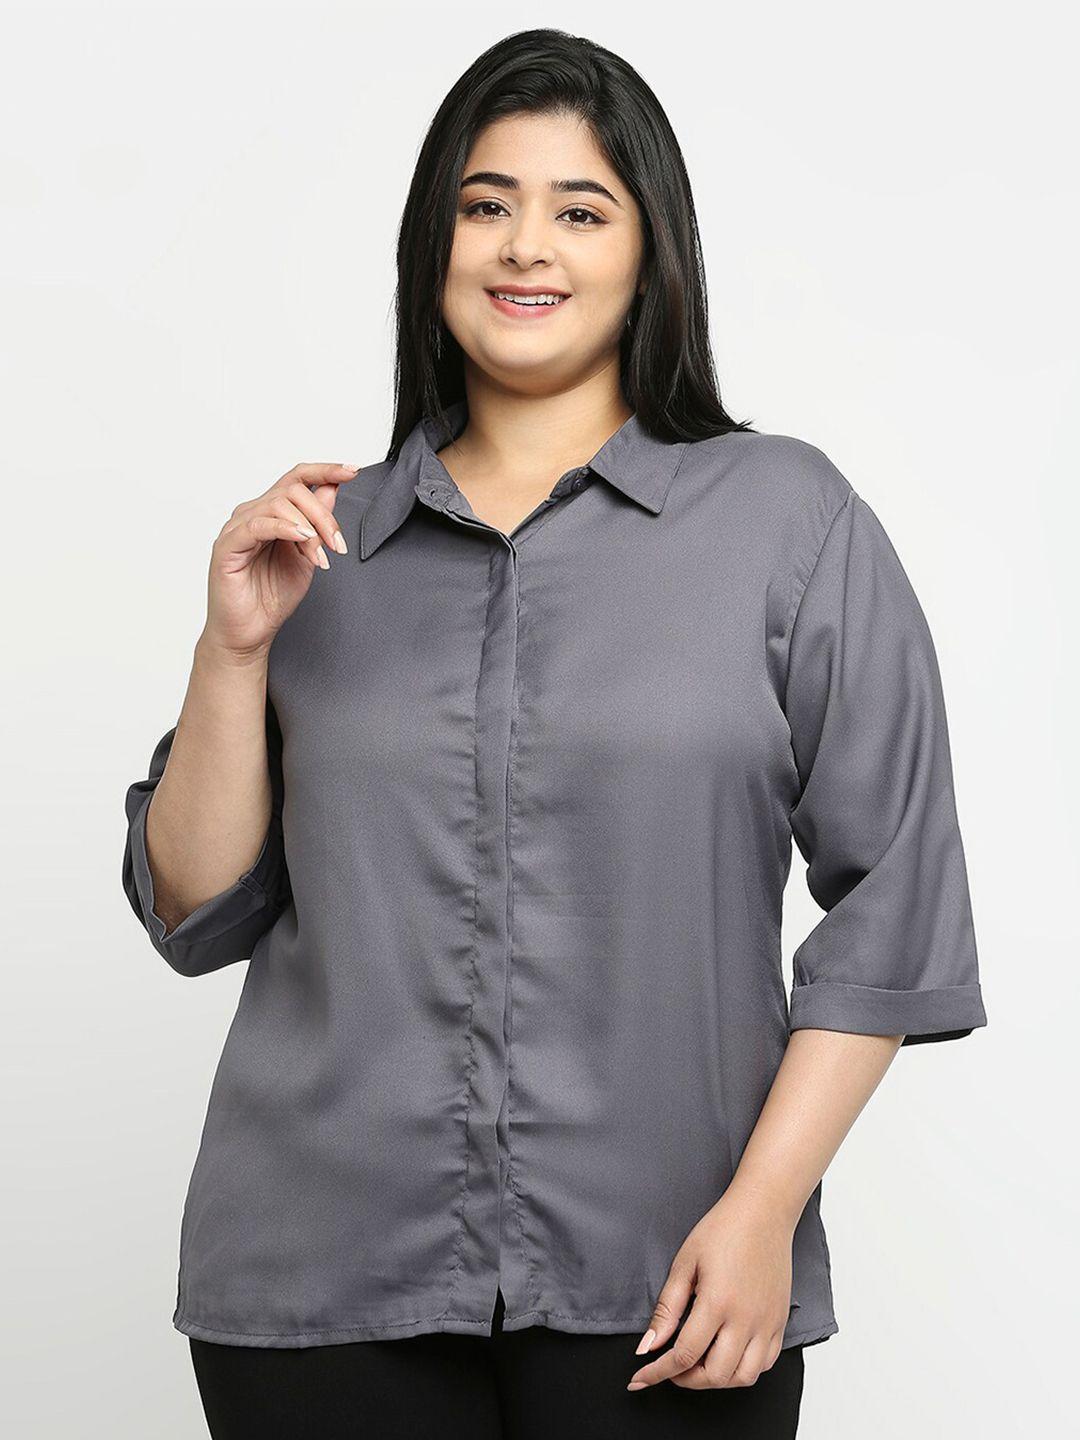 style-quotient-women-grey-spread-collar-plus-size-casual-shirt